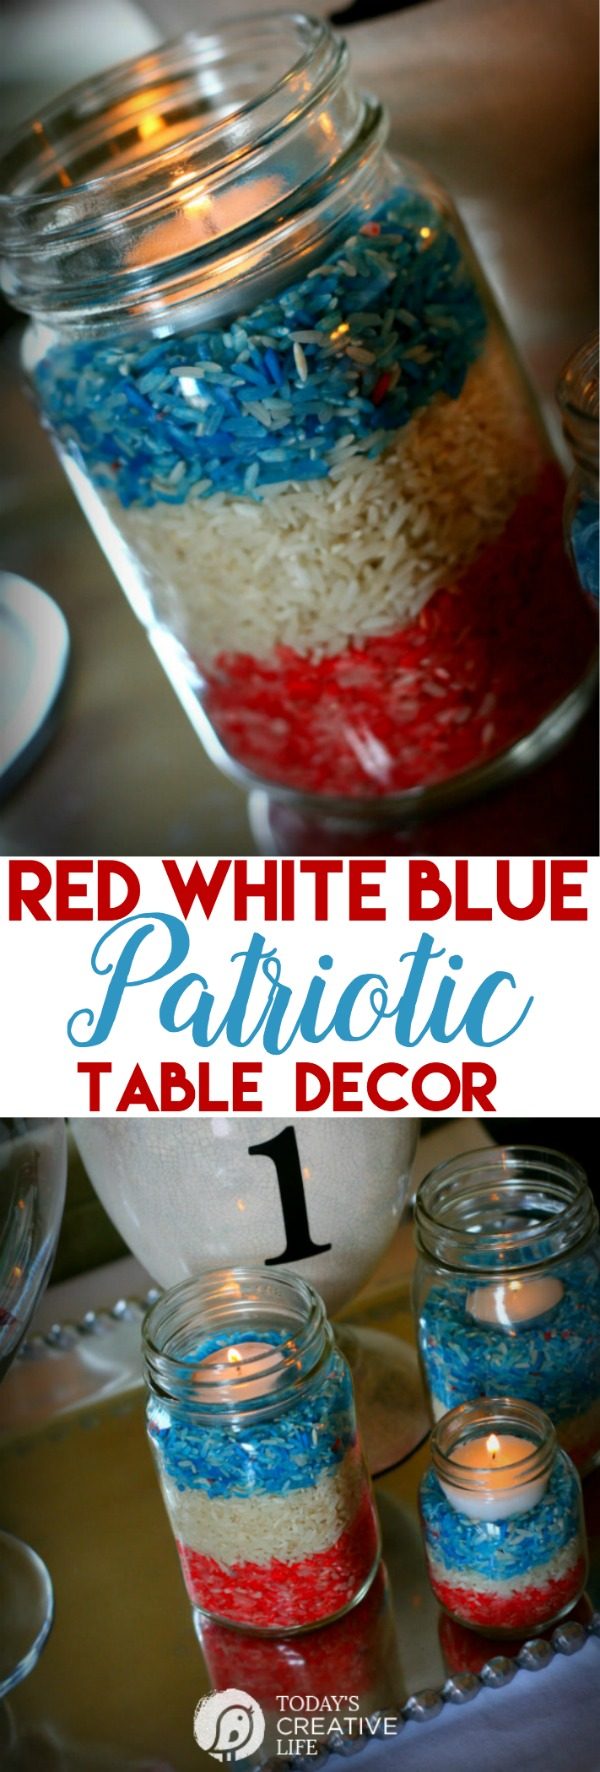 Memorial Day Craft - DIY Decor | Red White and Blue Table Decor made with colored rice. 